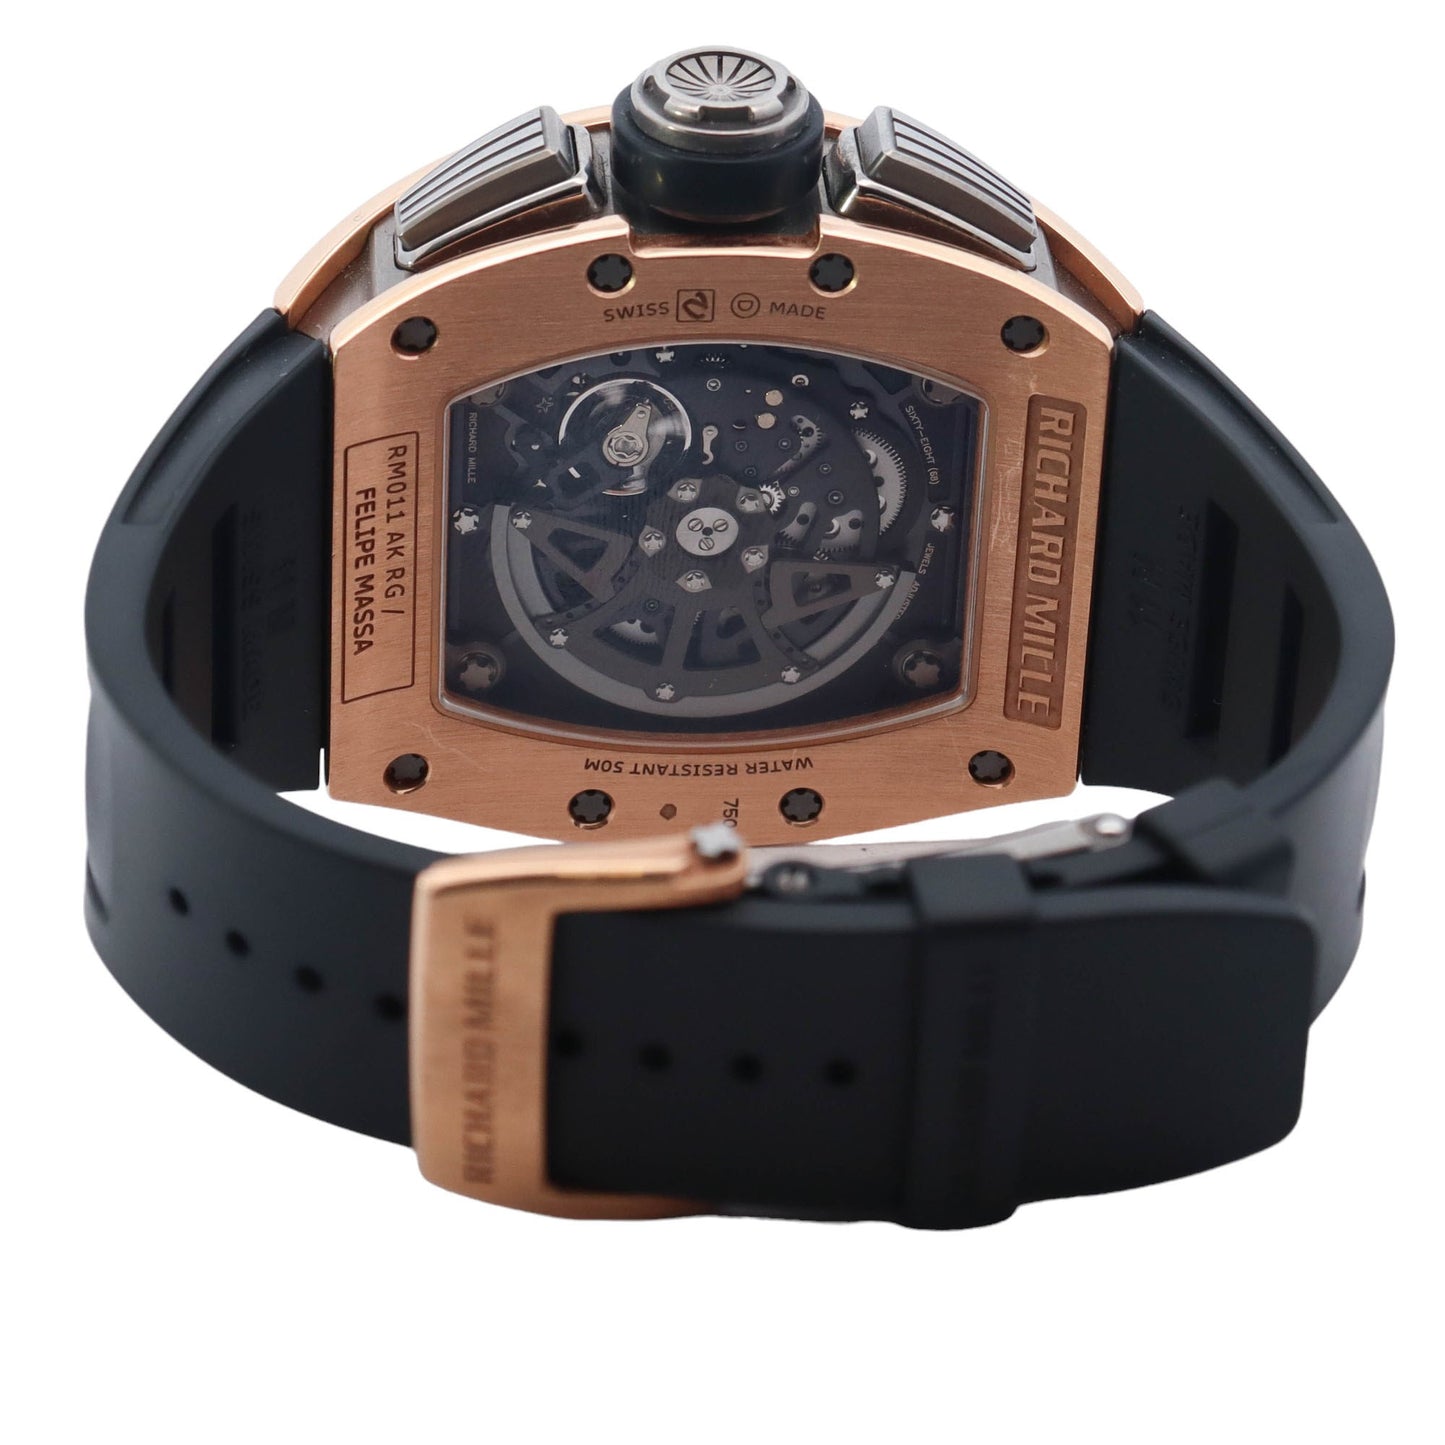 Richard Mille RM011 Rose Gold 41mm x 50mm Skeleton Arabic Dial Watch Reference# RM011 AK RG